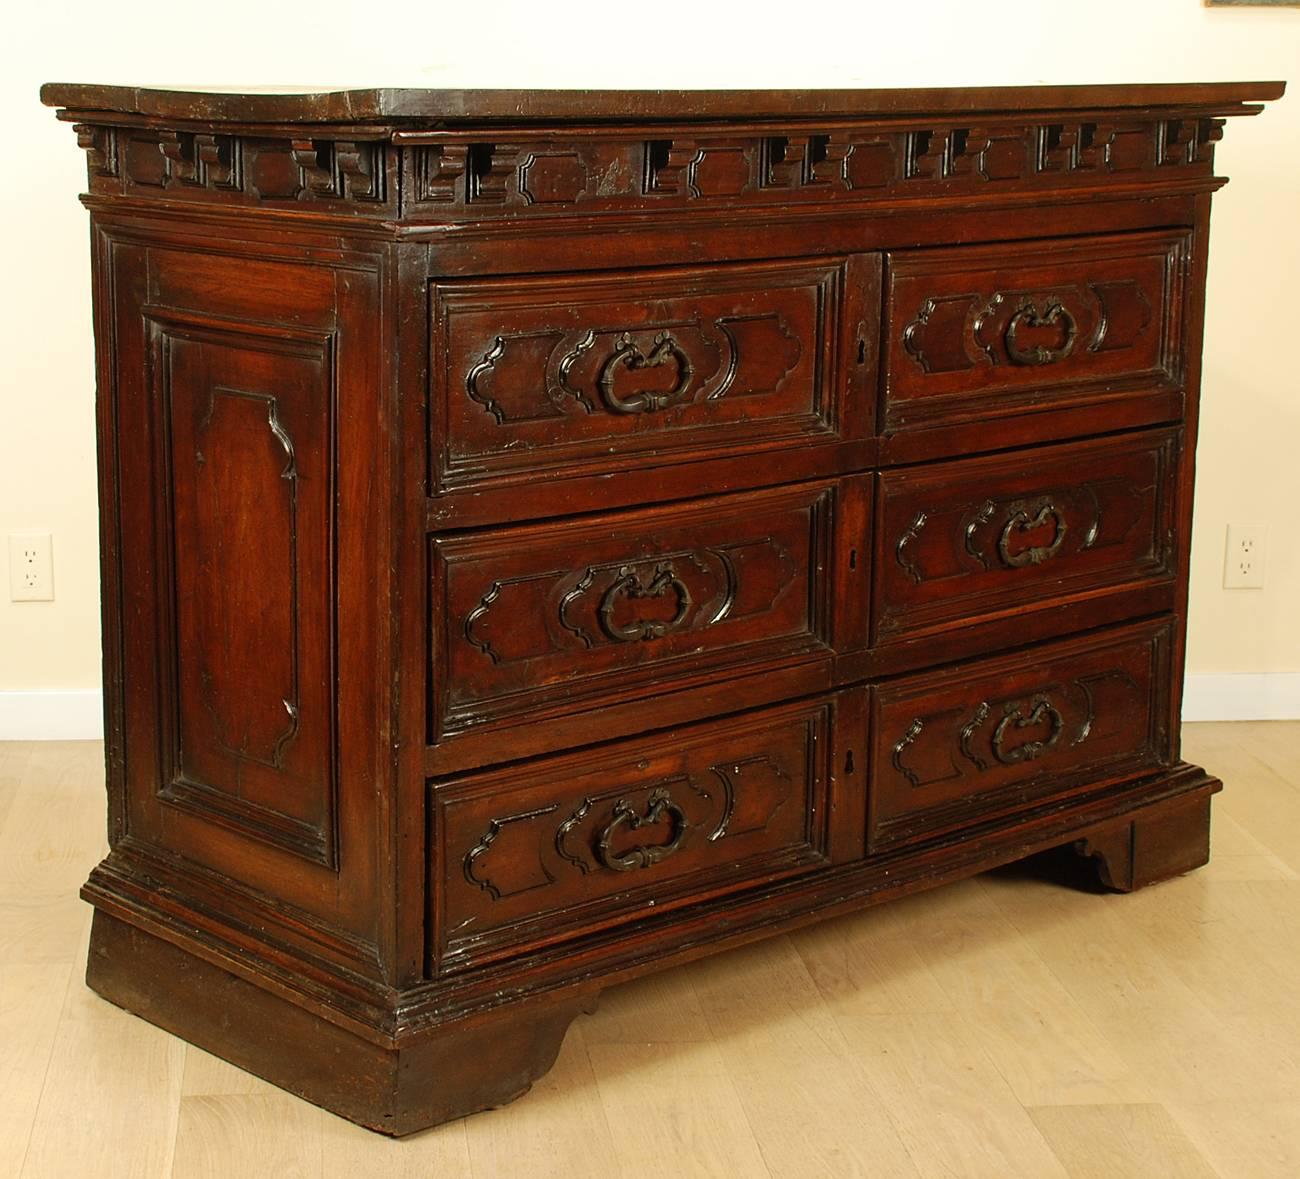 Italian Baroque period commode.
A stunning 17th century Italian Baroque period walnut commode with a rectangular dentil molded top above three long paneled drawers. The base with conforming apron and bracket feet.

 

Dimensions: 60.25 inches